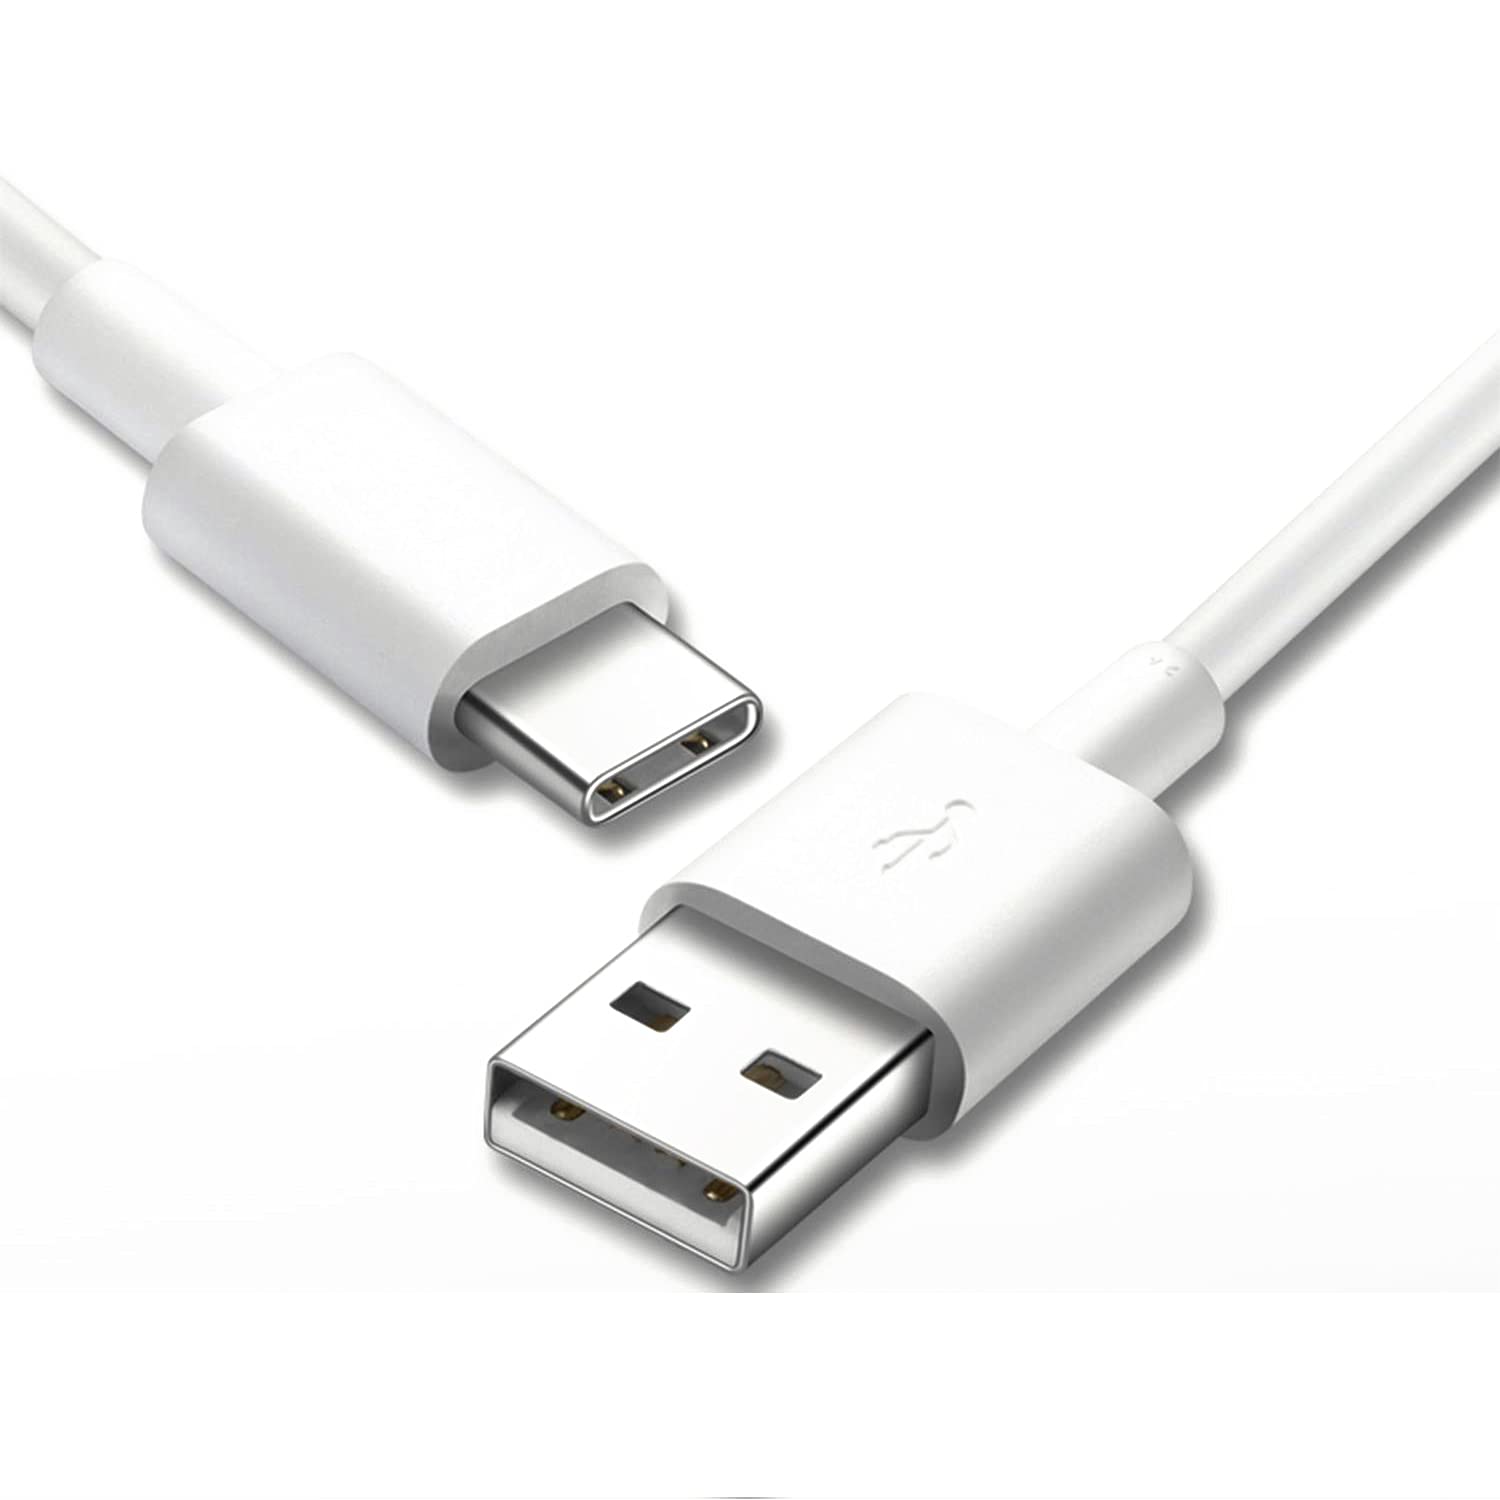 Self Organized Magnetic Fast charging cable - Buy Now Pakistan